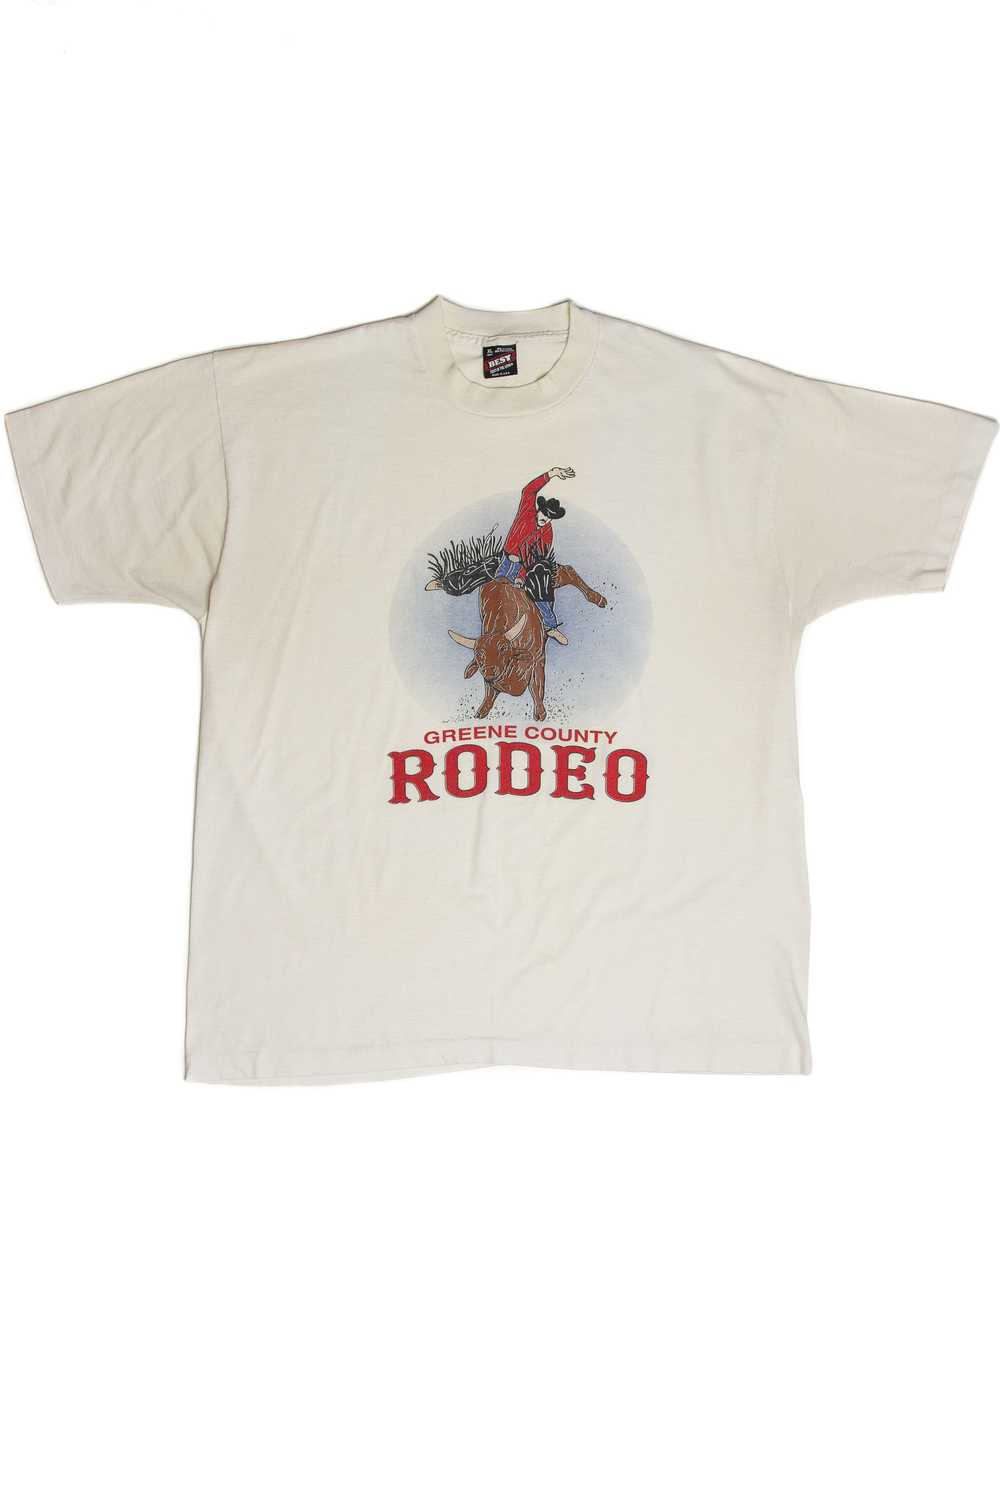 Vintage Greene County Rodeo T-Shirt - image 1